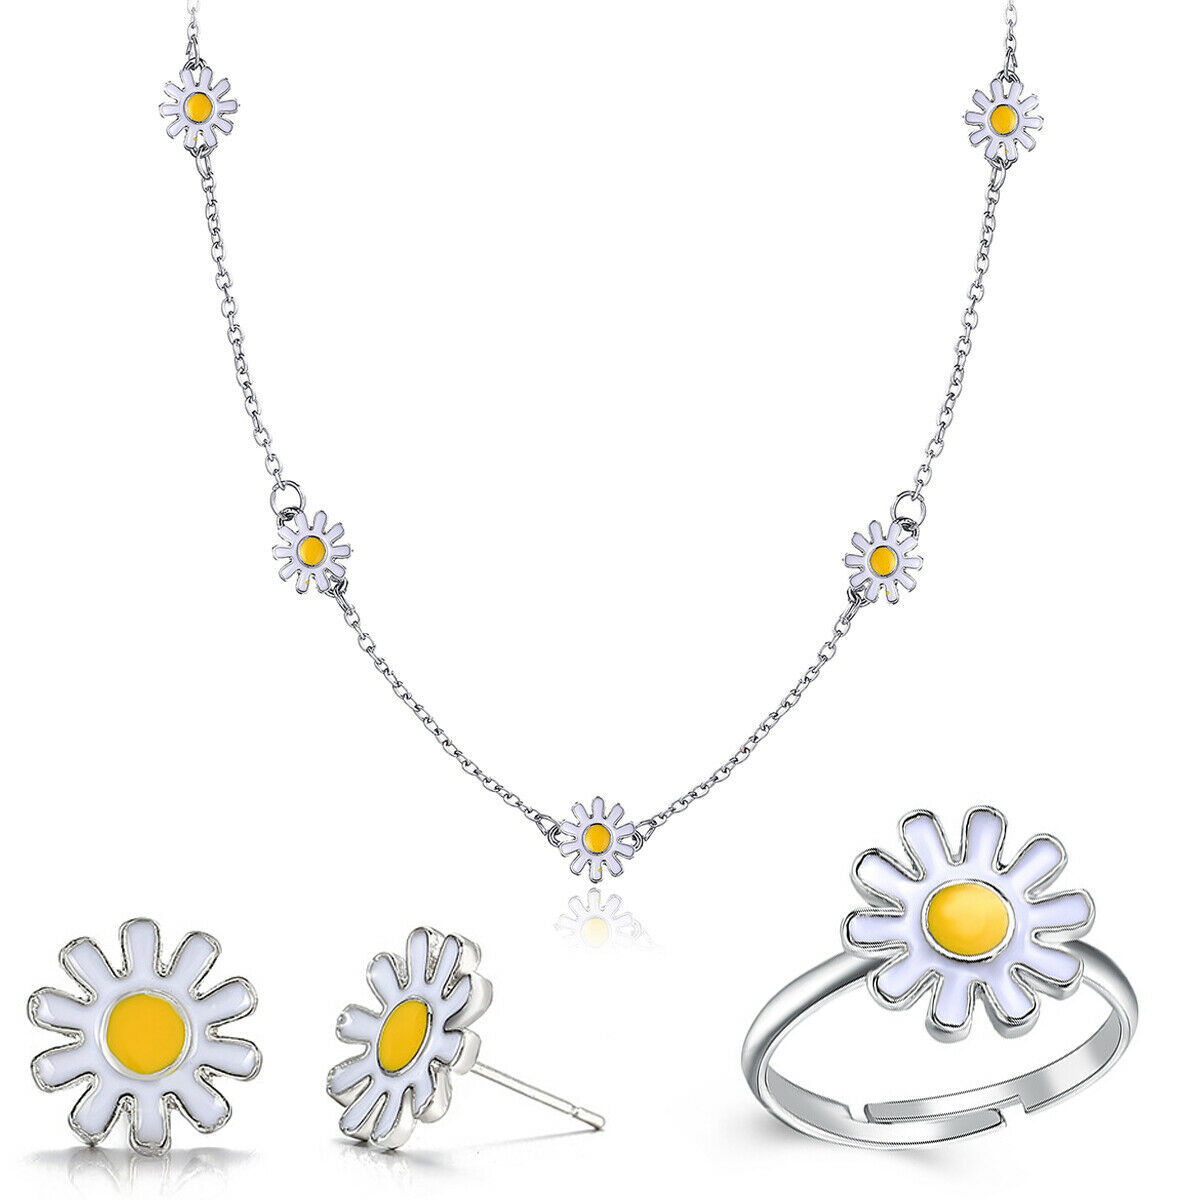 Cherry Blossoms Flower Jewelry Sets(Ring+Earrings+Necklace+Bracelet)